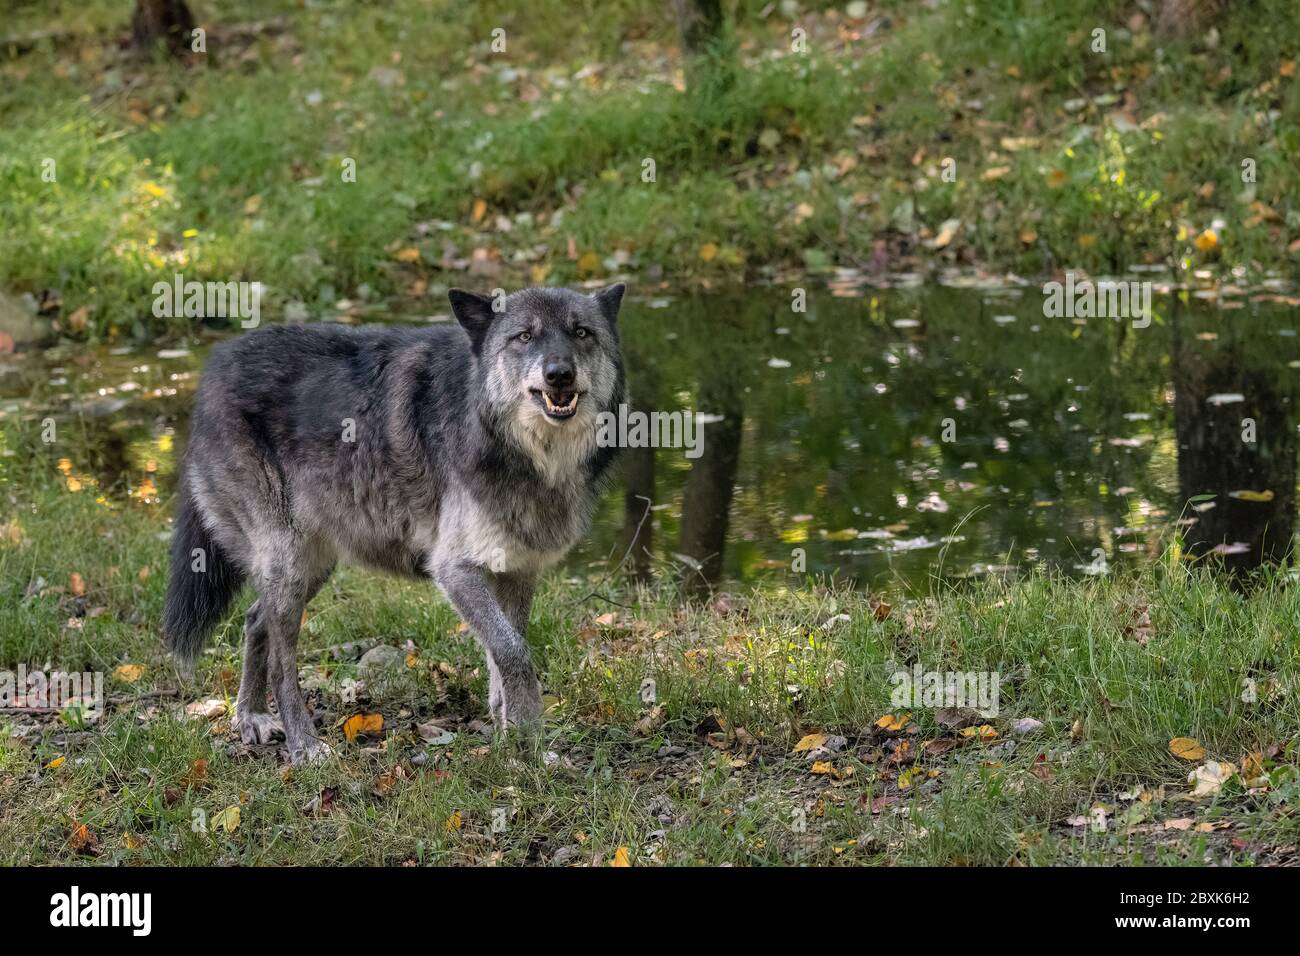 A British Columbia wolf, snarling and barring its teeth as it walks in front of a pond with Fall leaves on the ground. Stock Photo